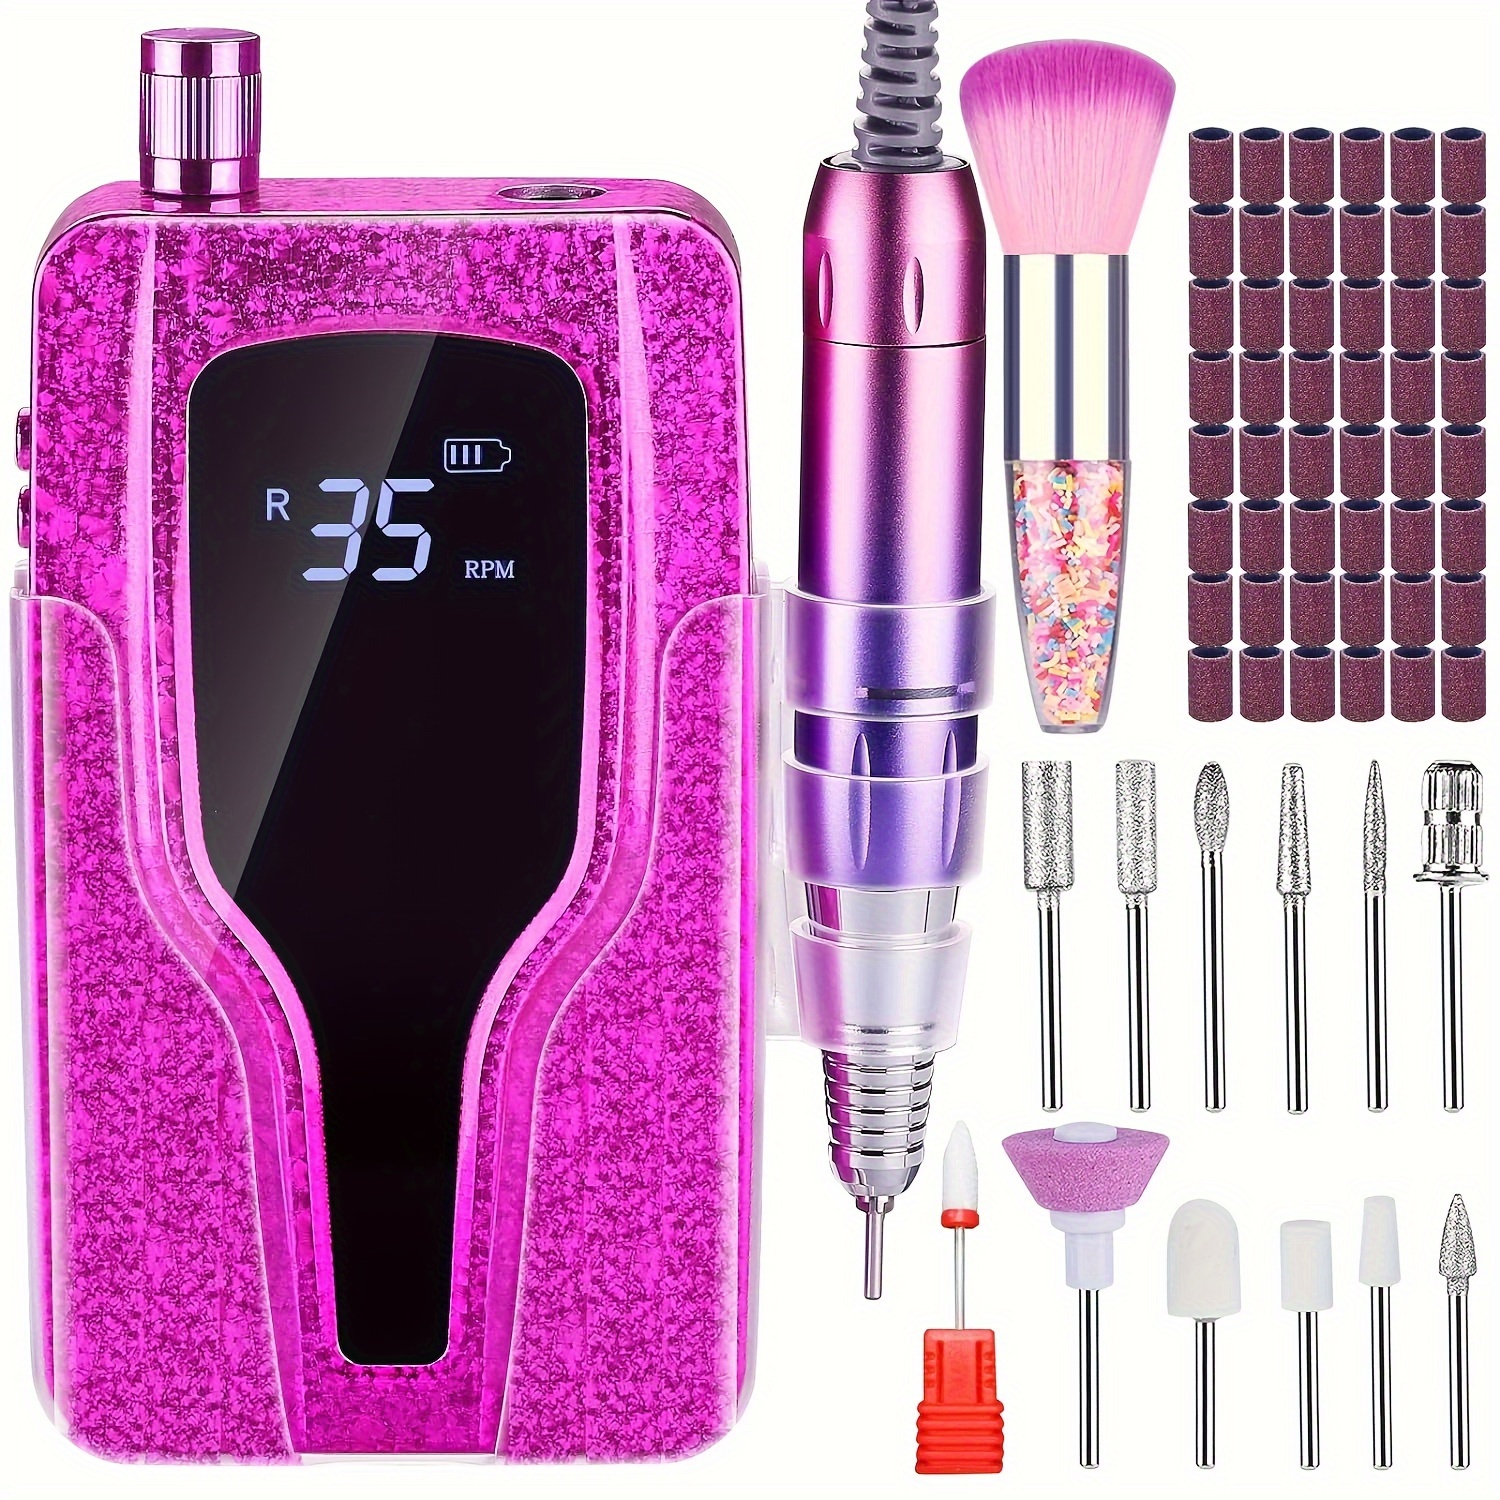 

Nail Drill, 35000 Rpm Nail Drill Machine, Rechargeable Electric Nail File Machine For Acrylic Nails Gel Polishing Removing, Portable Cordless Efile With Bits Kit For Manicure Salon Home Pink